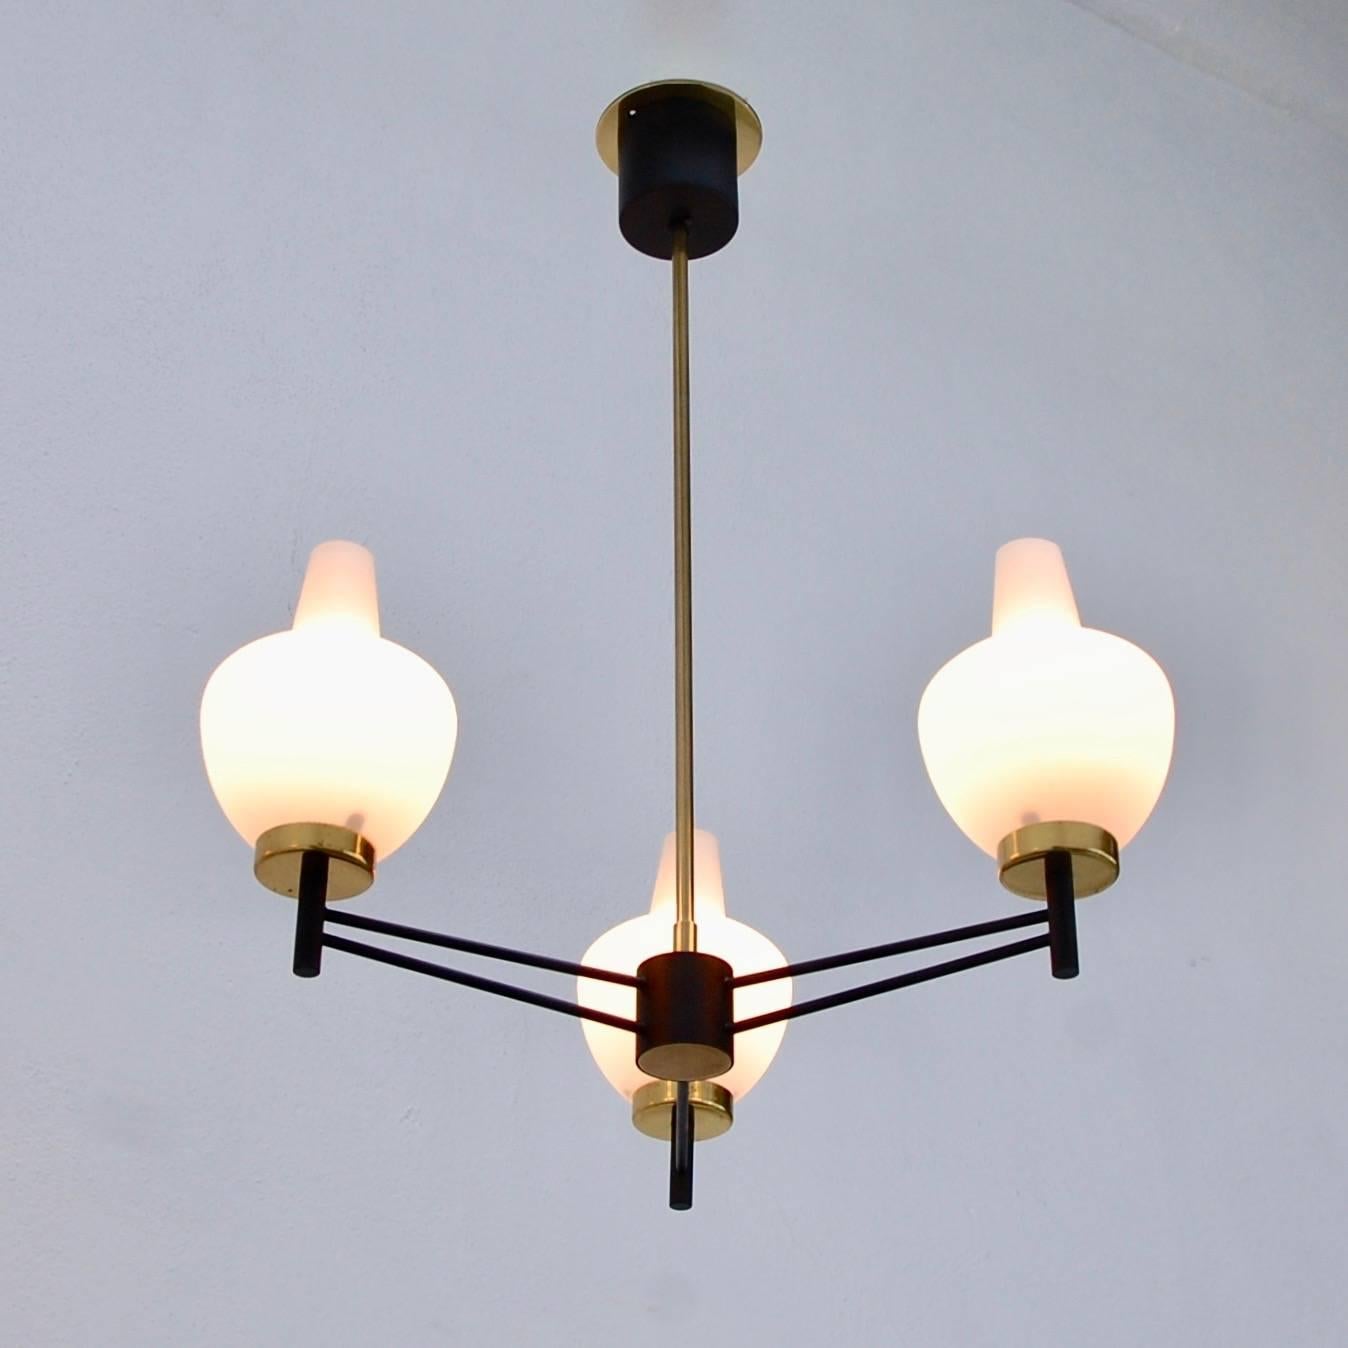 Modern and elegant petite midcentury Italian chandelier in brass, painted brass and glass. Original finish, partially restored. Currently wired for the US. Single medium-based E26 socket per shade. Total maximum wattage recommended 180 watts.